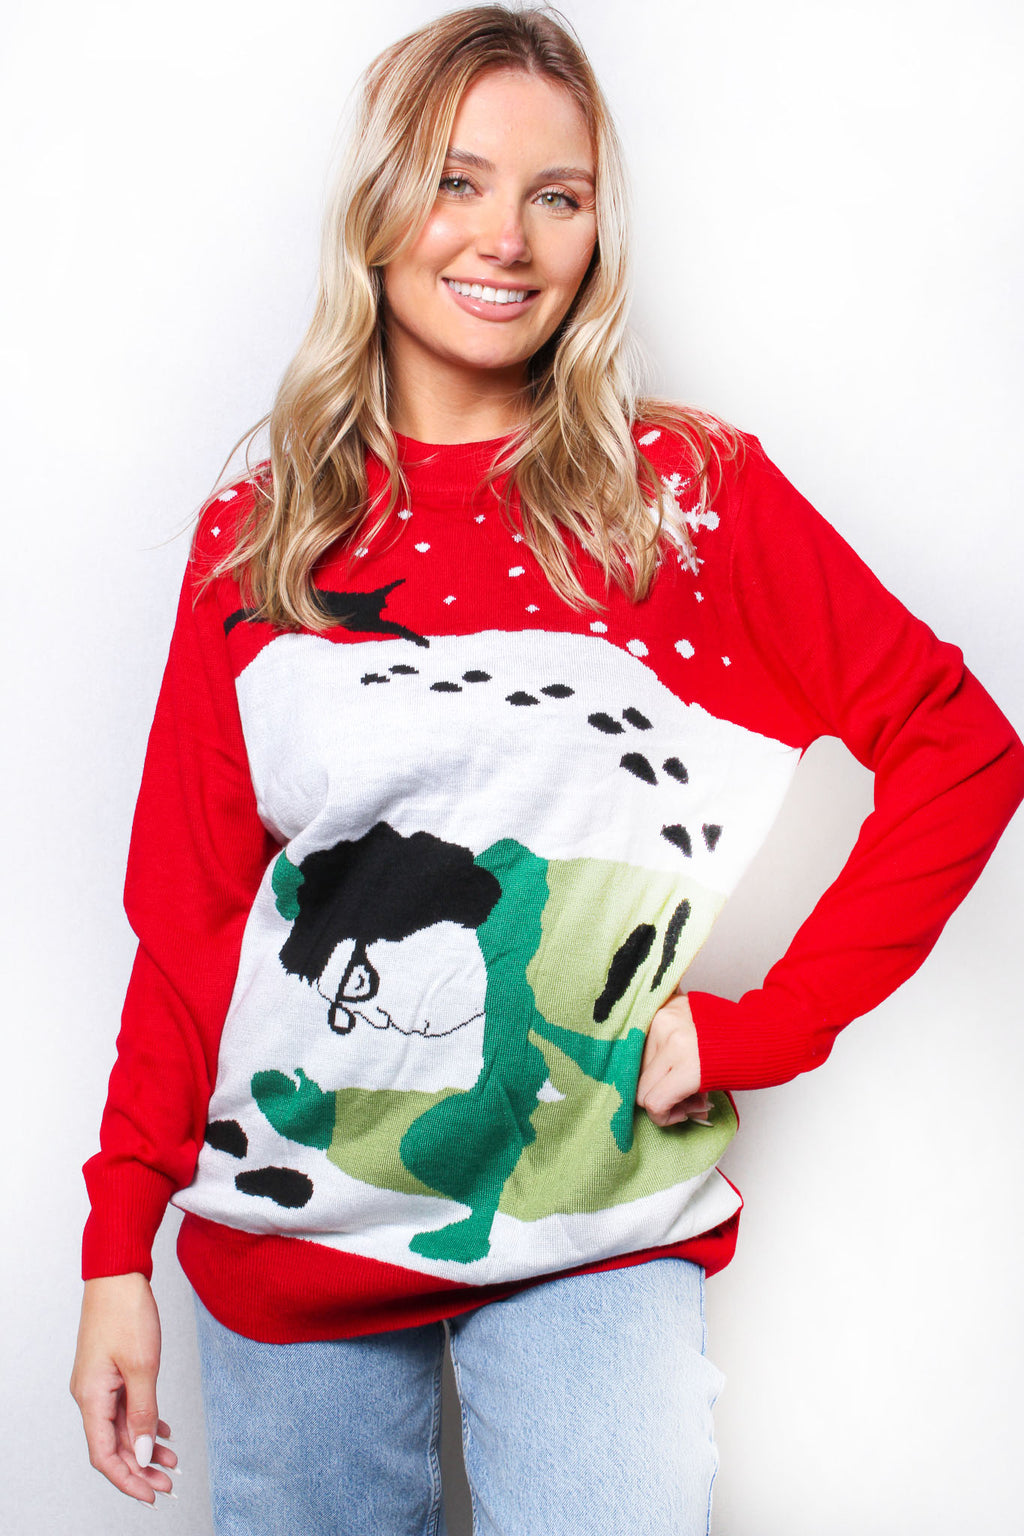 Women's Crew Neck Long Sleeves Knit Christmas Print Sweater